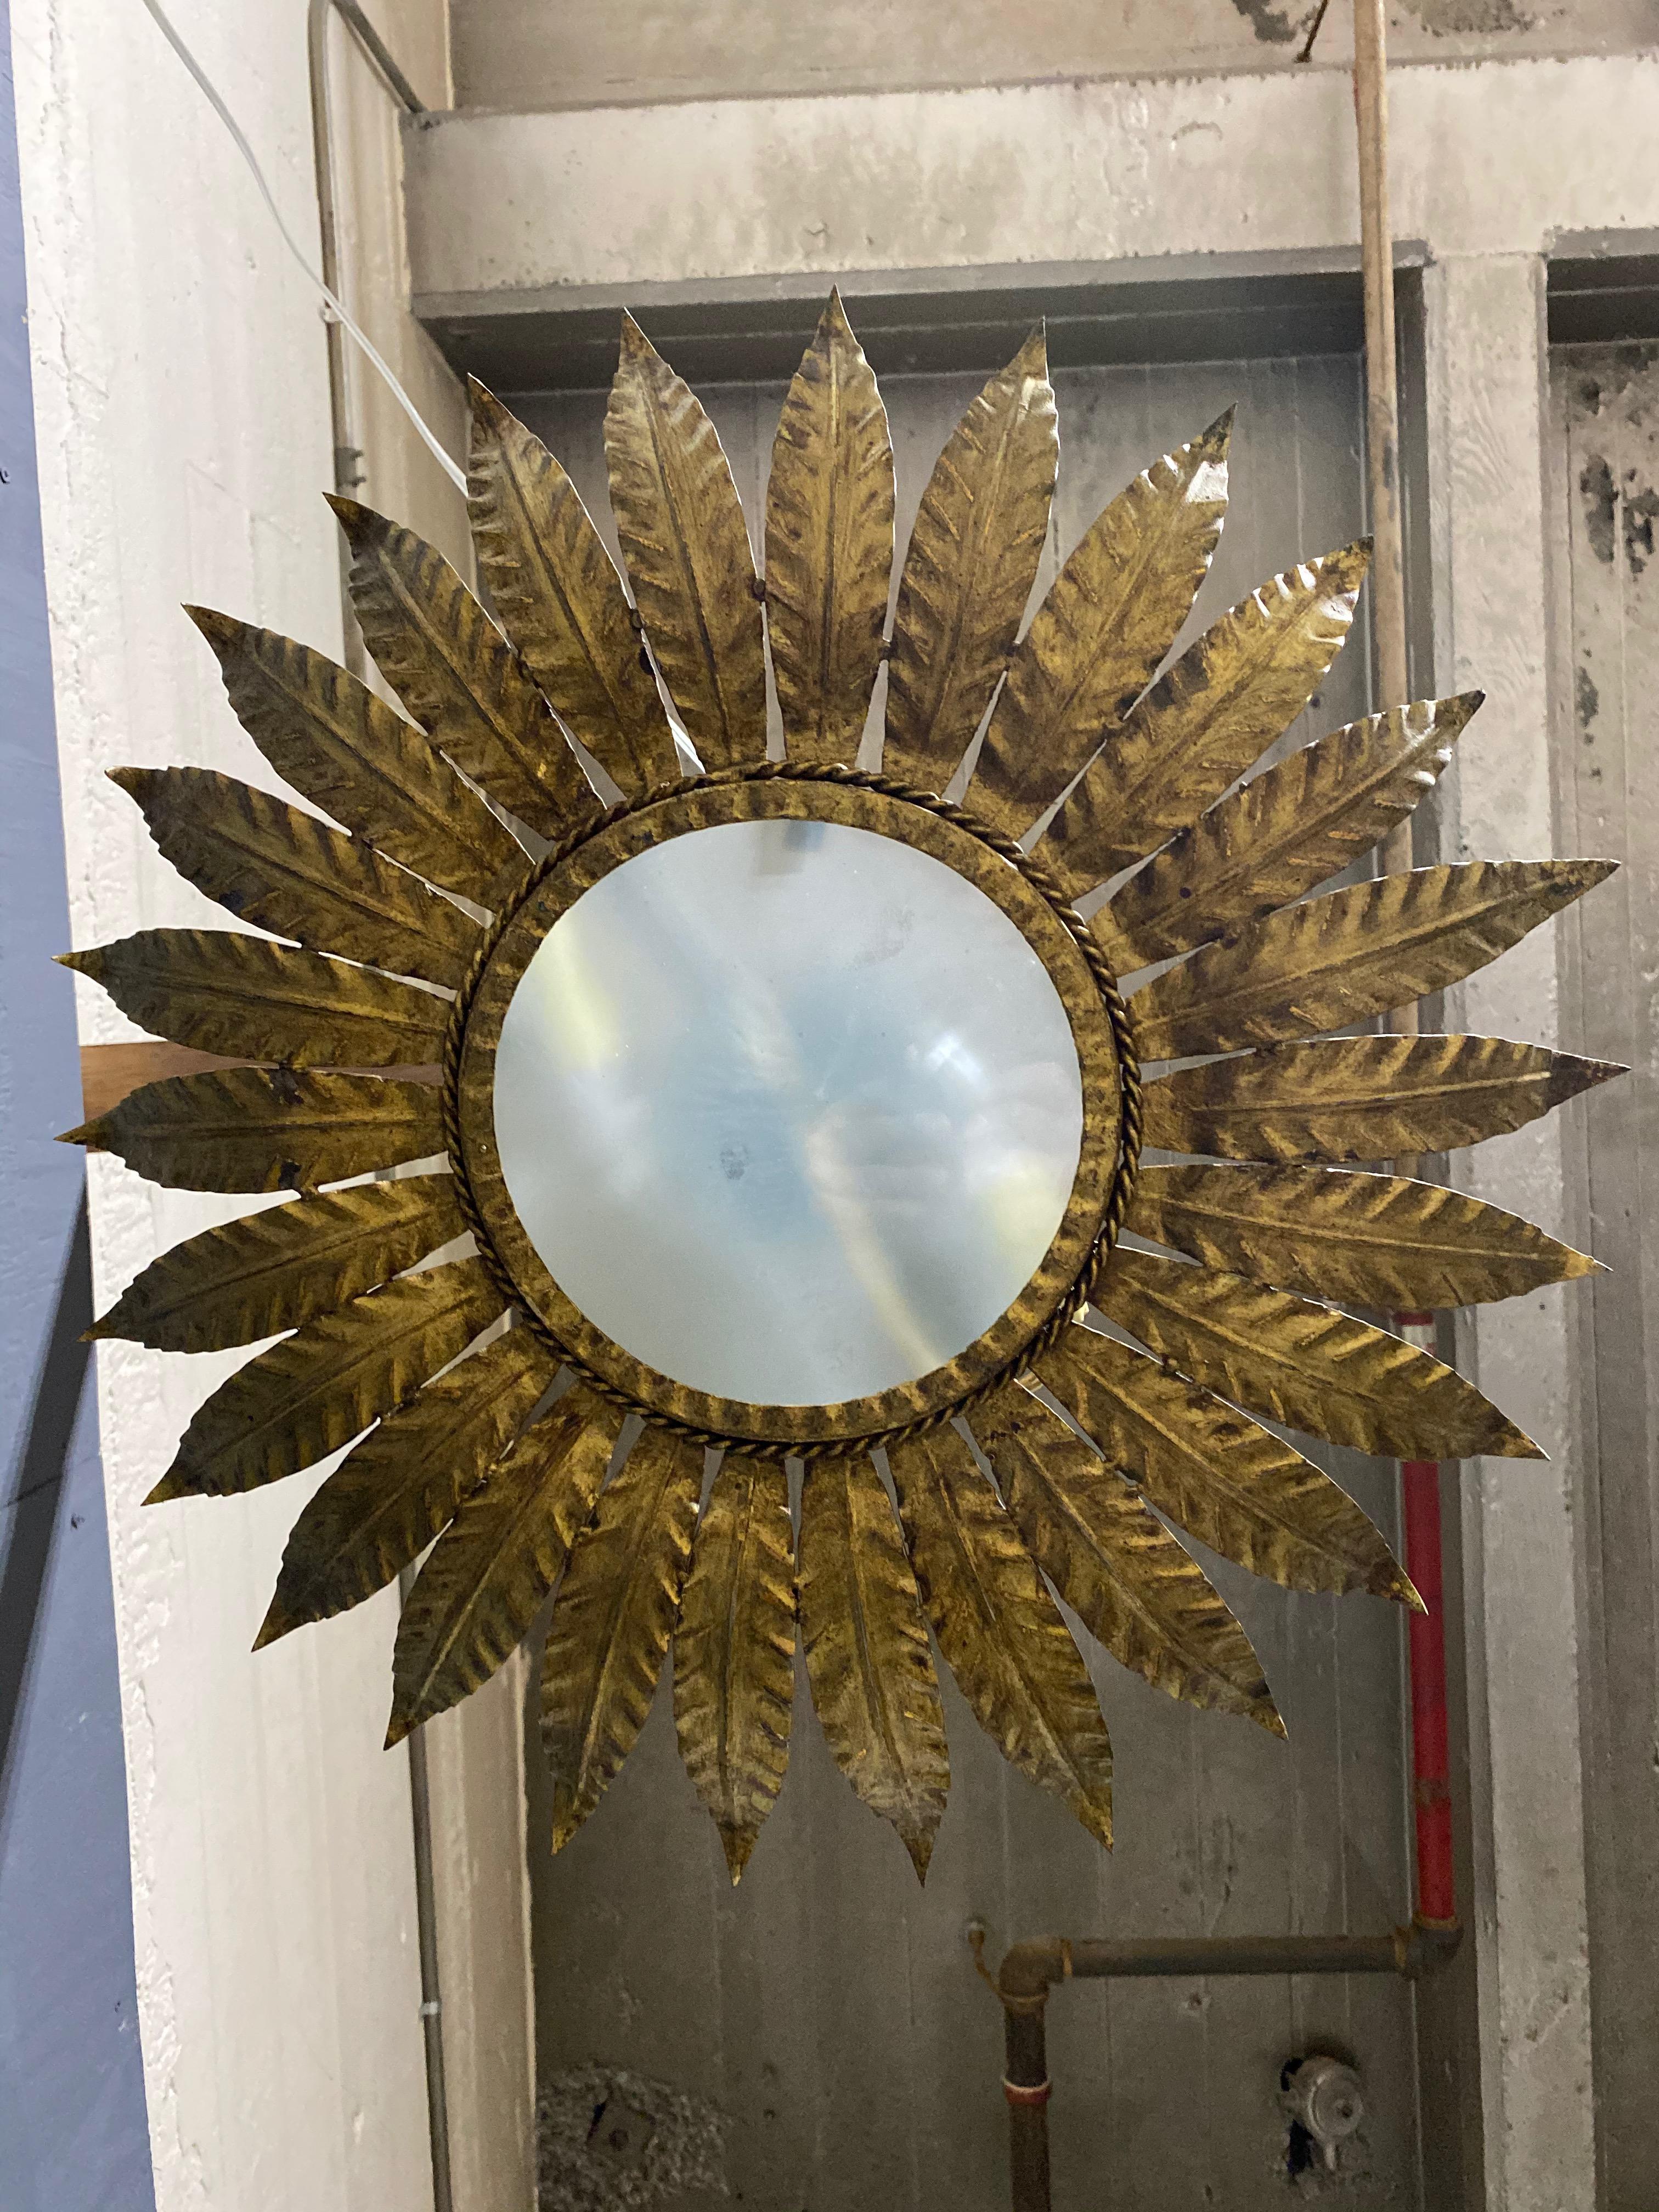 Spanish Colonial Spanish Gilt Metal Ceiling Fixture with Radiating Leaves